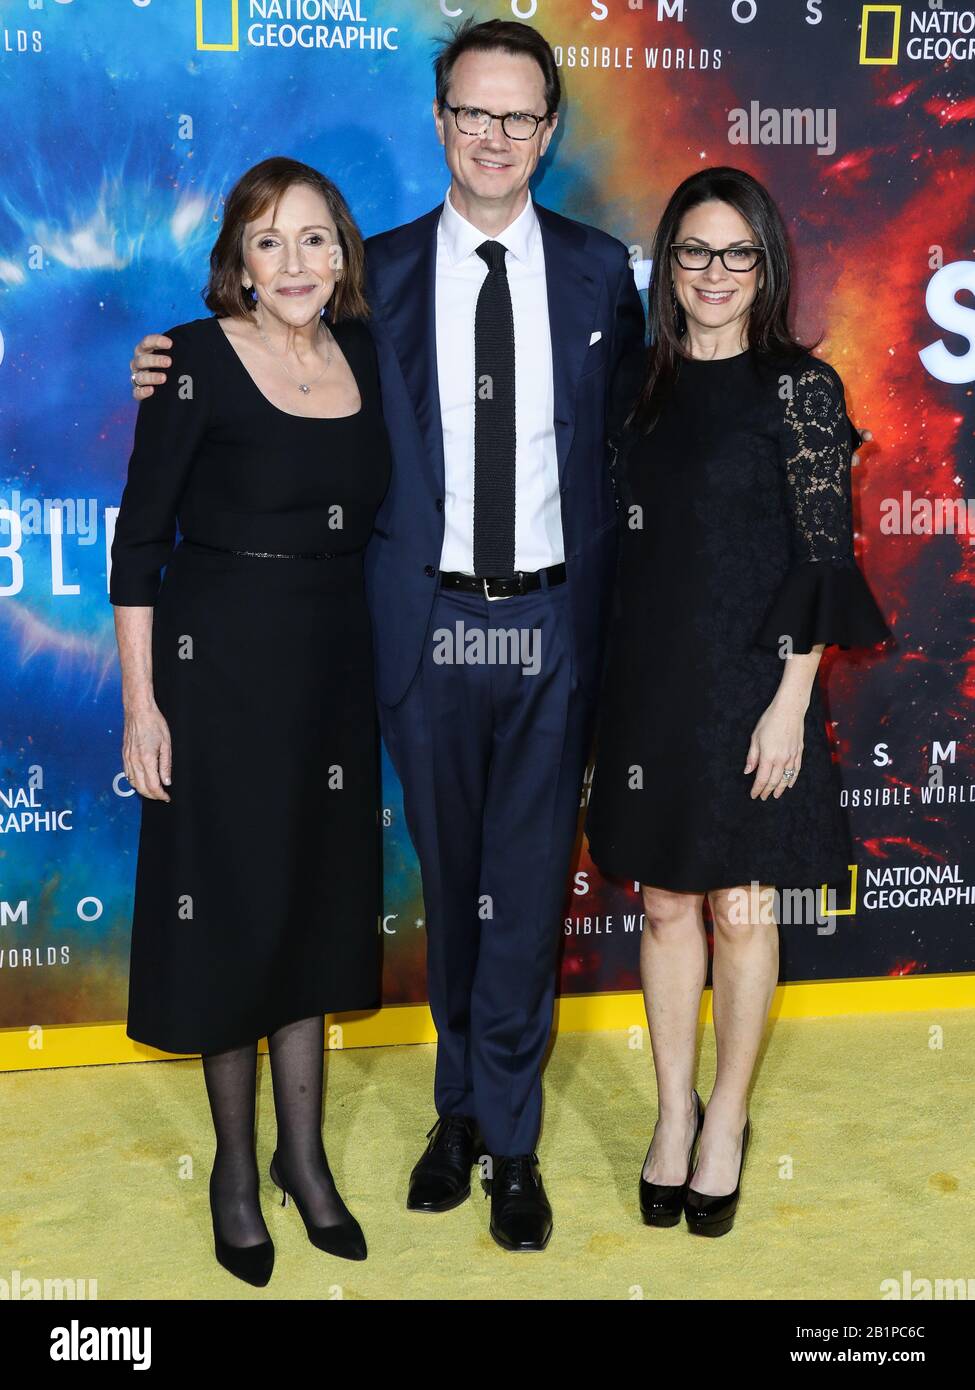 Westwood, United States. 26th Feb, 2020. WESTWOOD, LOS ANGELES, CALIFORNIA, USA - FEBRUARY 26: Ann Druyan, Peter Rice and Courteney Monroe arrive at the Los Angeles Premiere Of National Geographic's 'Cosmos: Possible Worlds' held at Royce Hall at the University of California, Los Angeles (UCLA) on February 26, 2020 in Westwood, Los Angeles, California, United States. (Photo by Xavier Collin/Image Press Agency) Credit: Image Press Agency/Alamy Live News Stock Photo